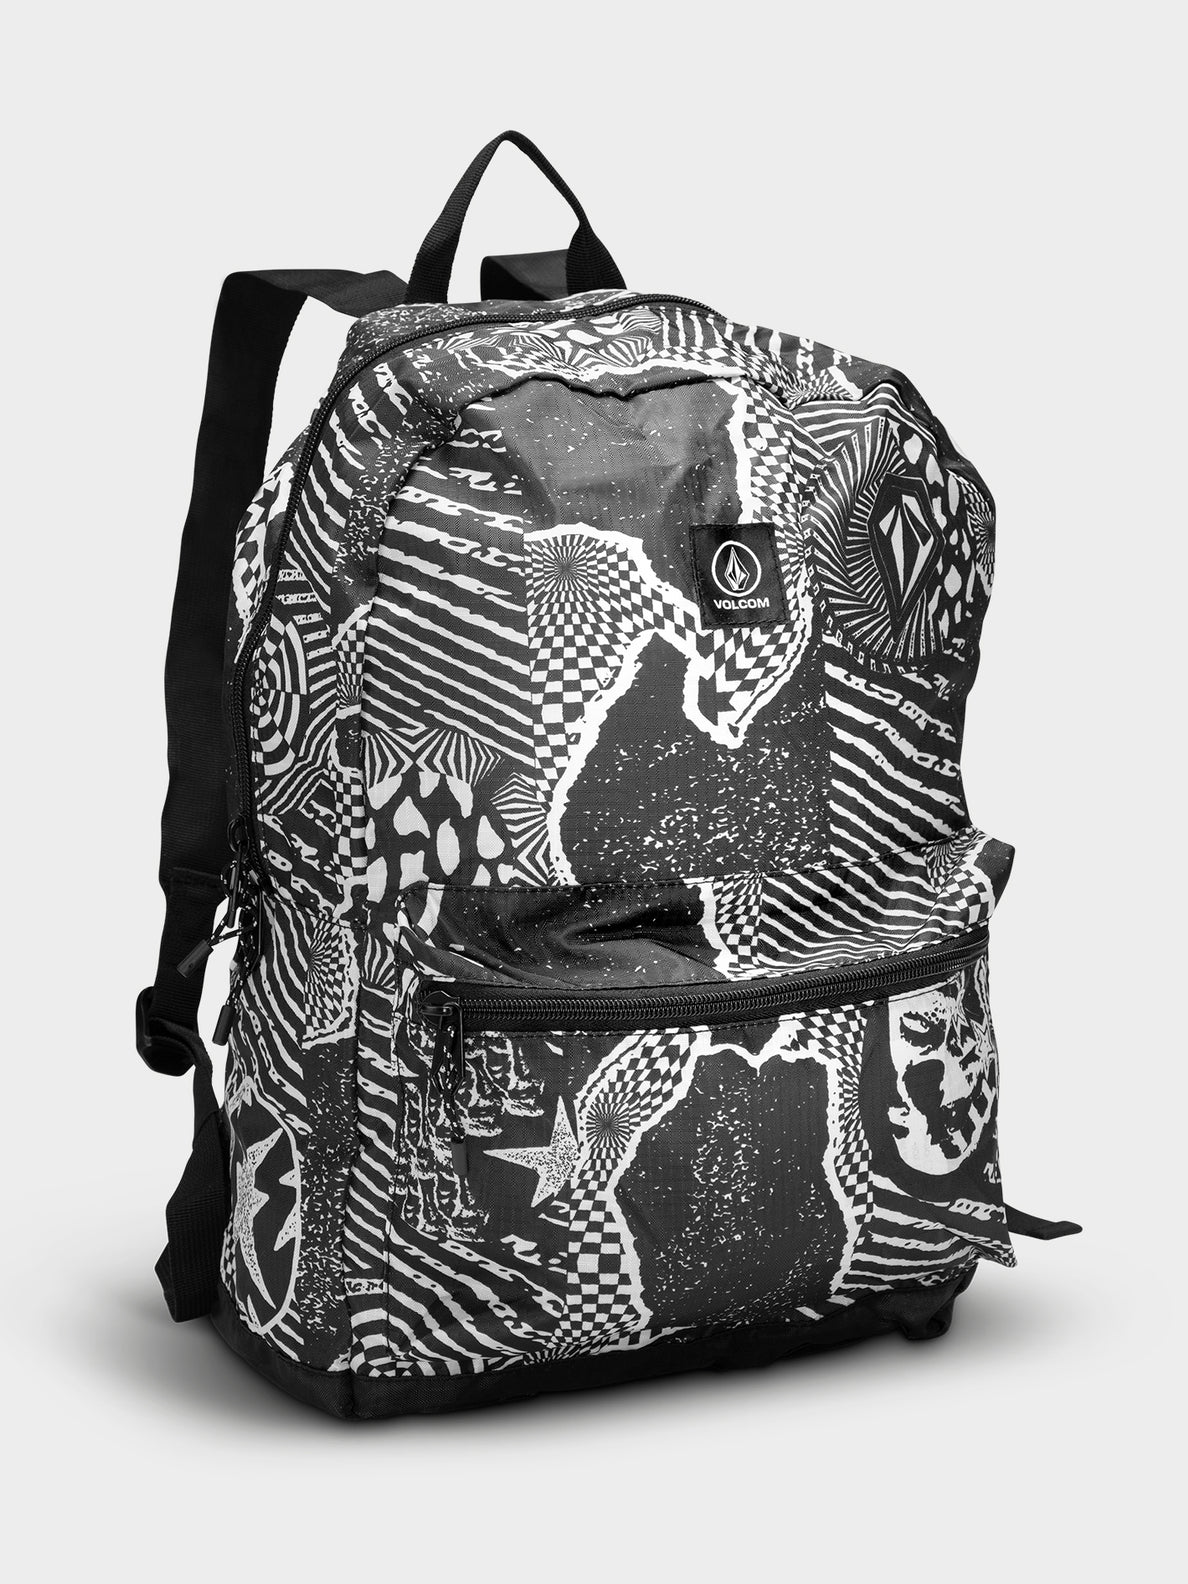 Packable Backpack - Black White